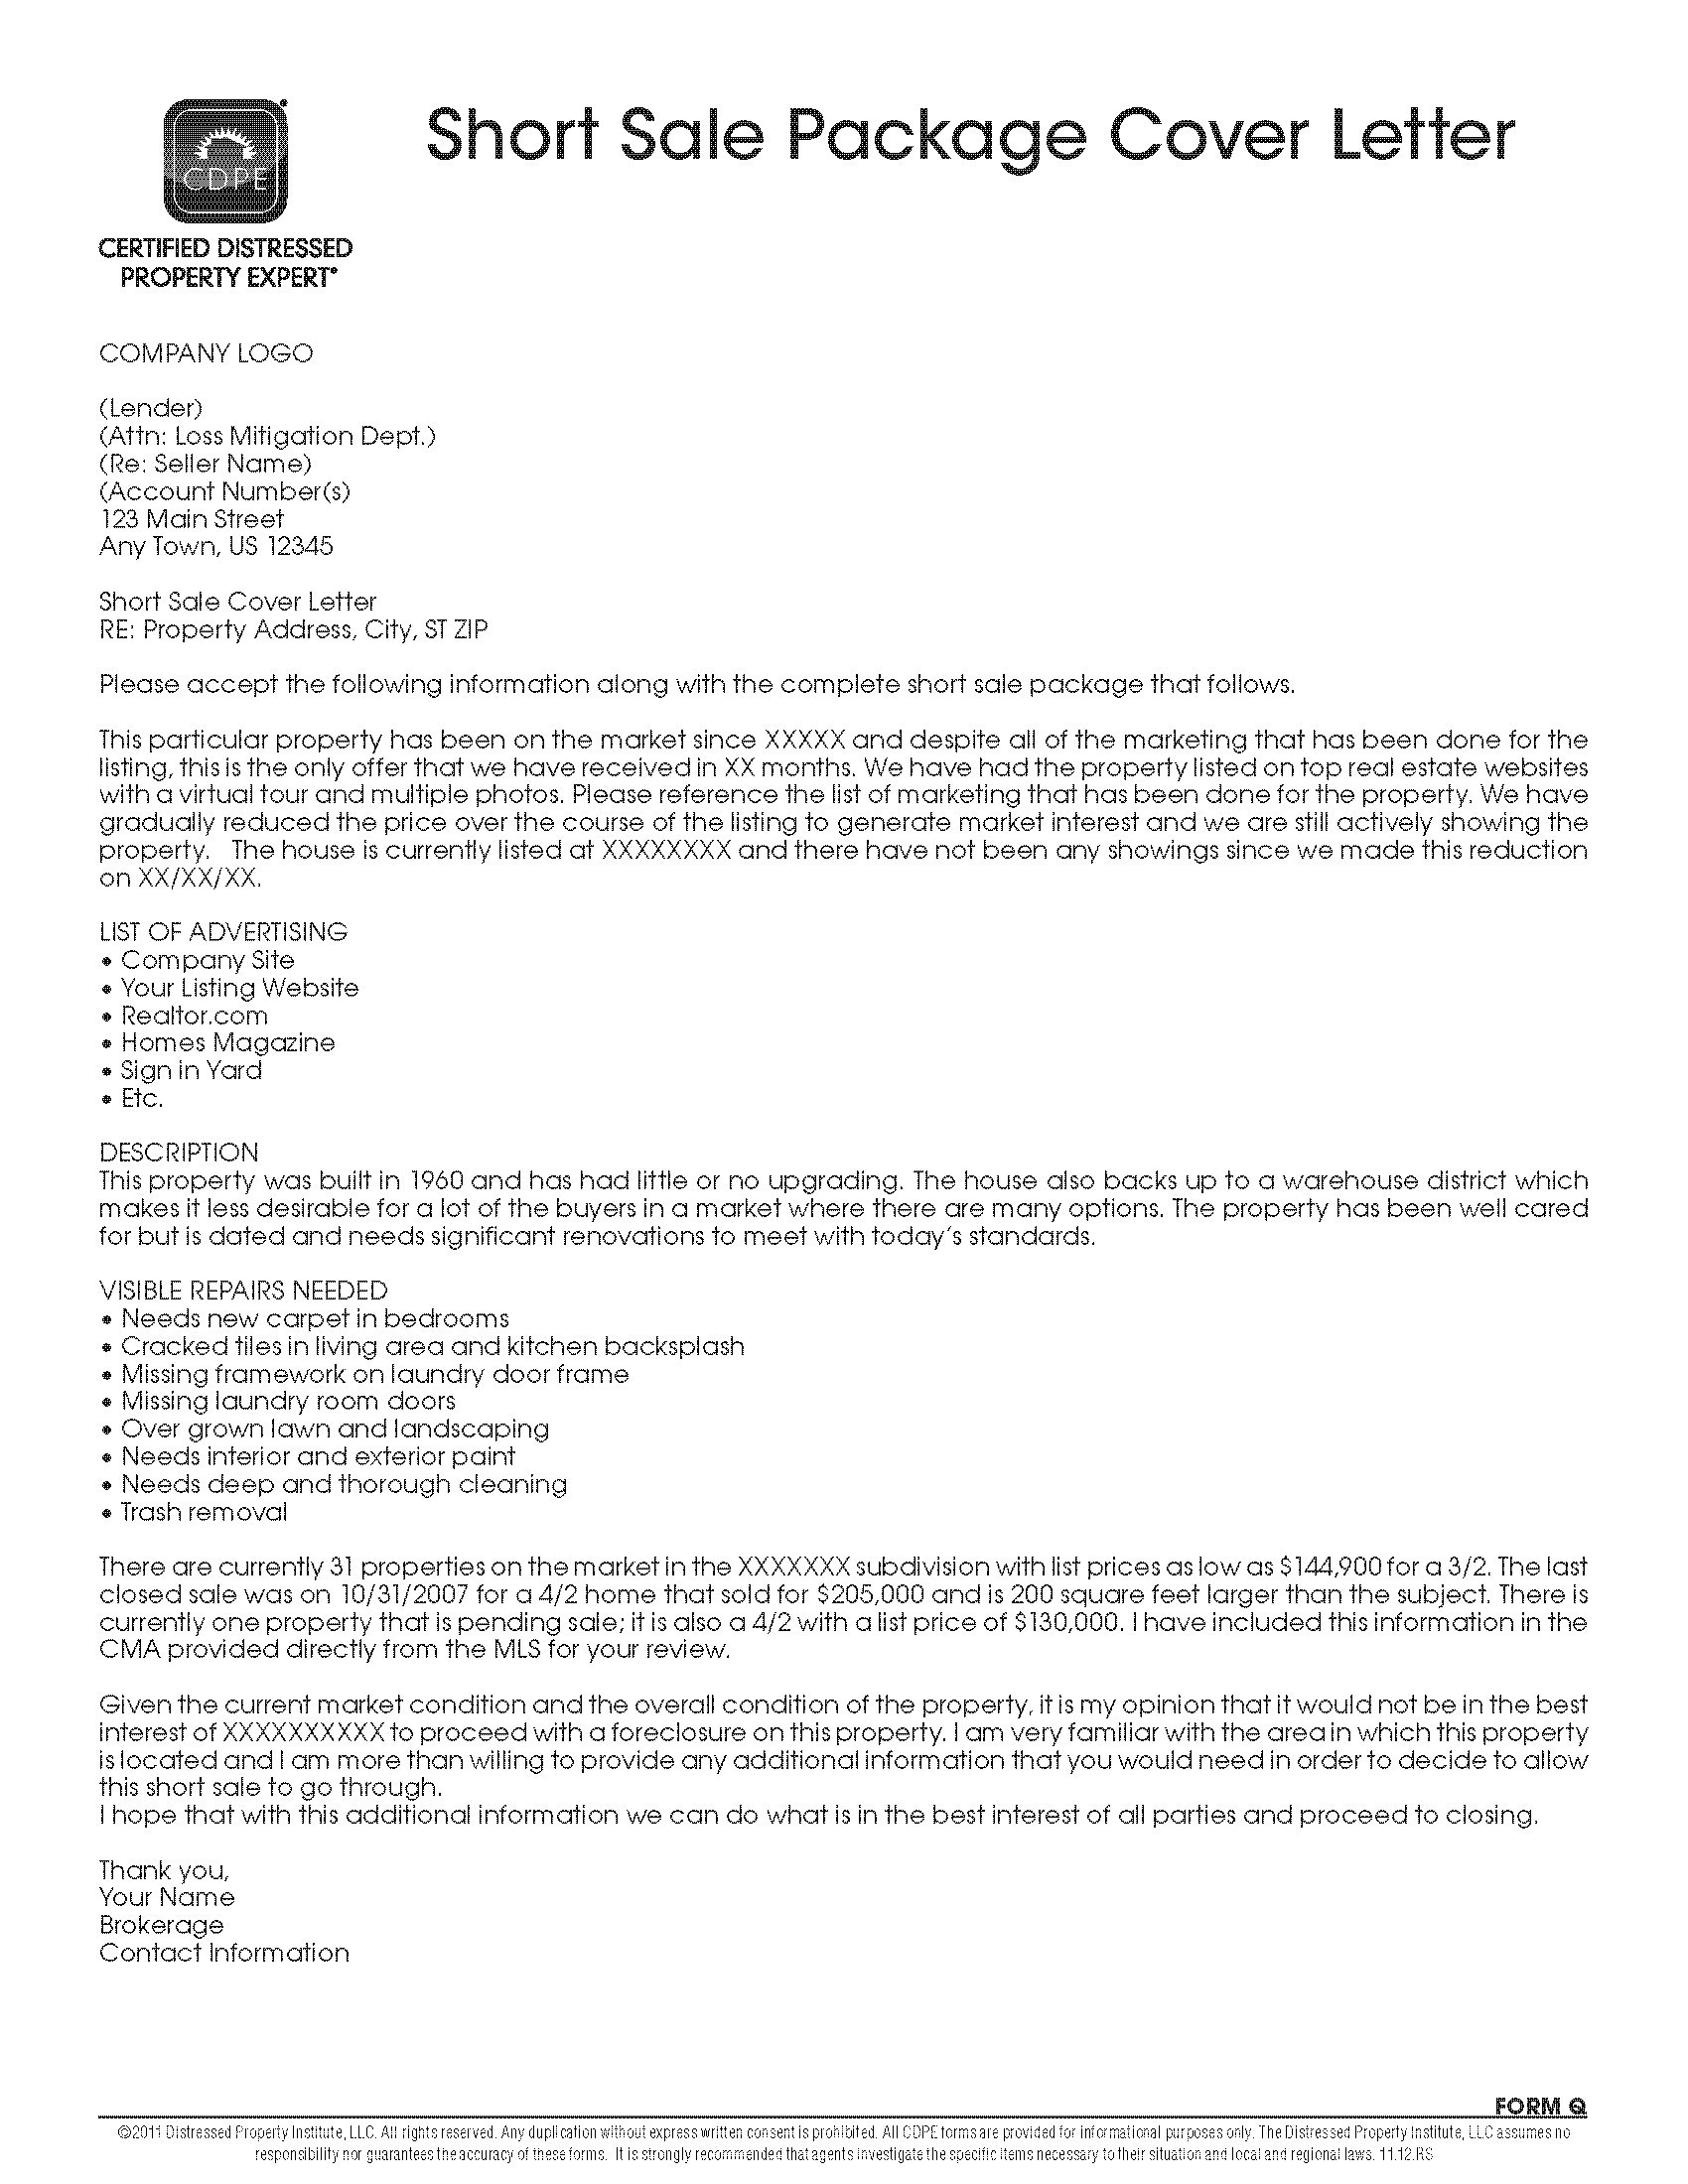 Letter to Home Seller From Buyer Template - Unique Corporate Express Templates